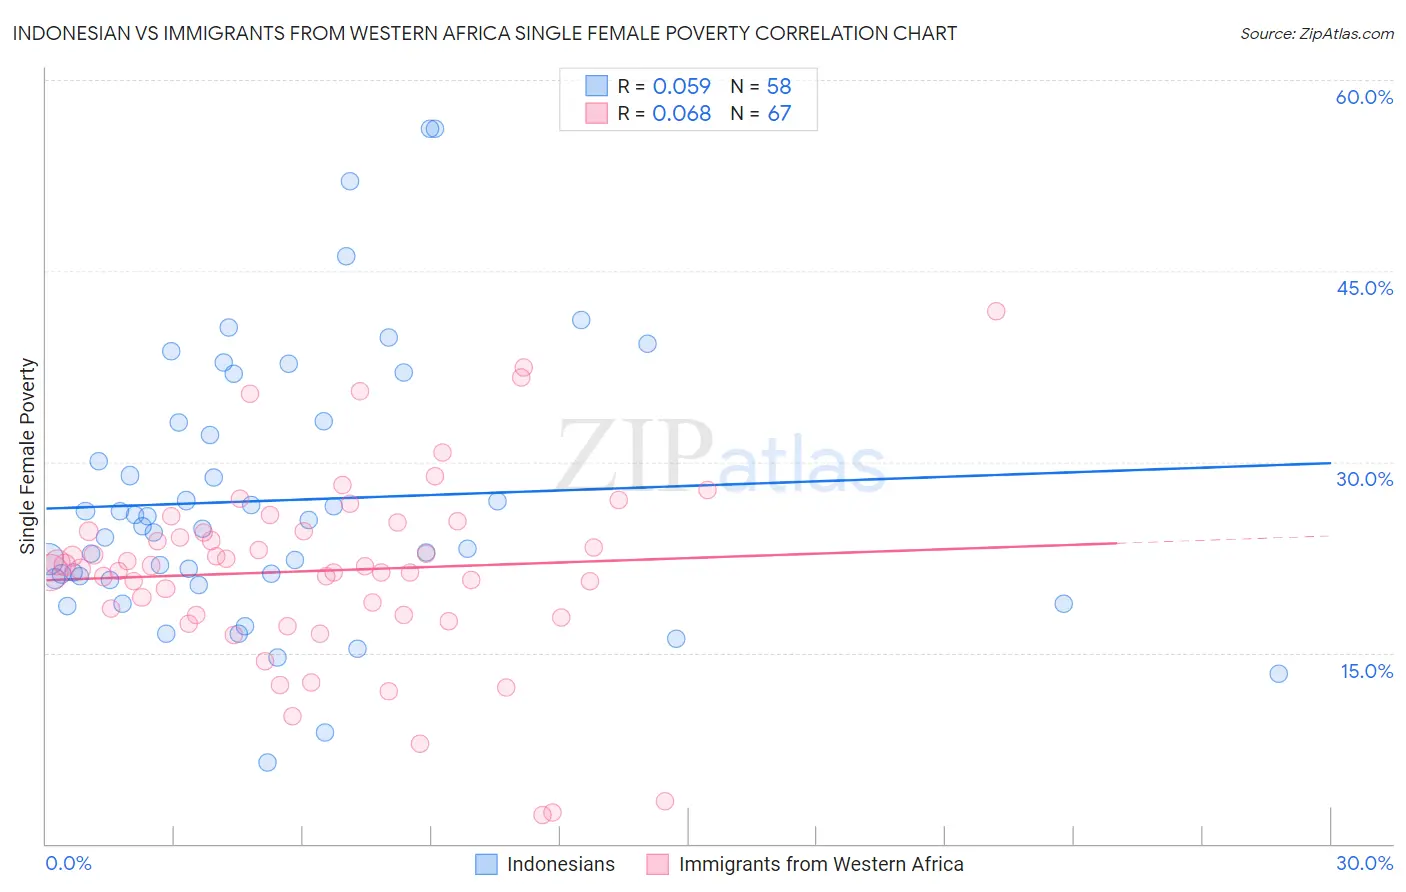 Indonesian vs Immigrants from Western Africa Single Female Poverty